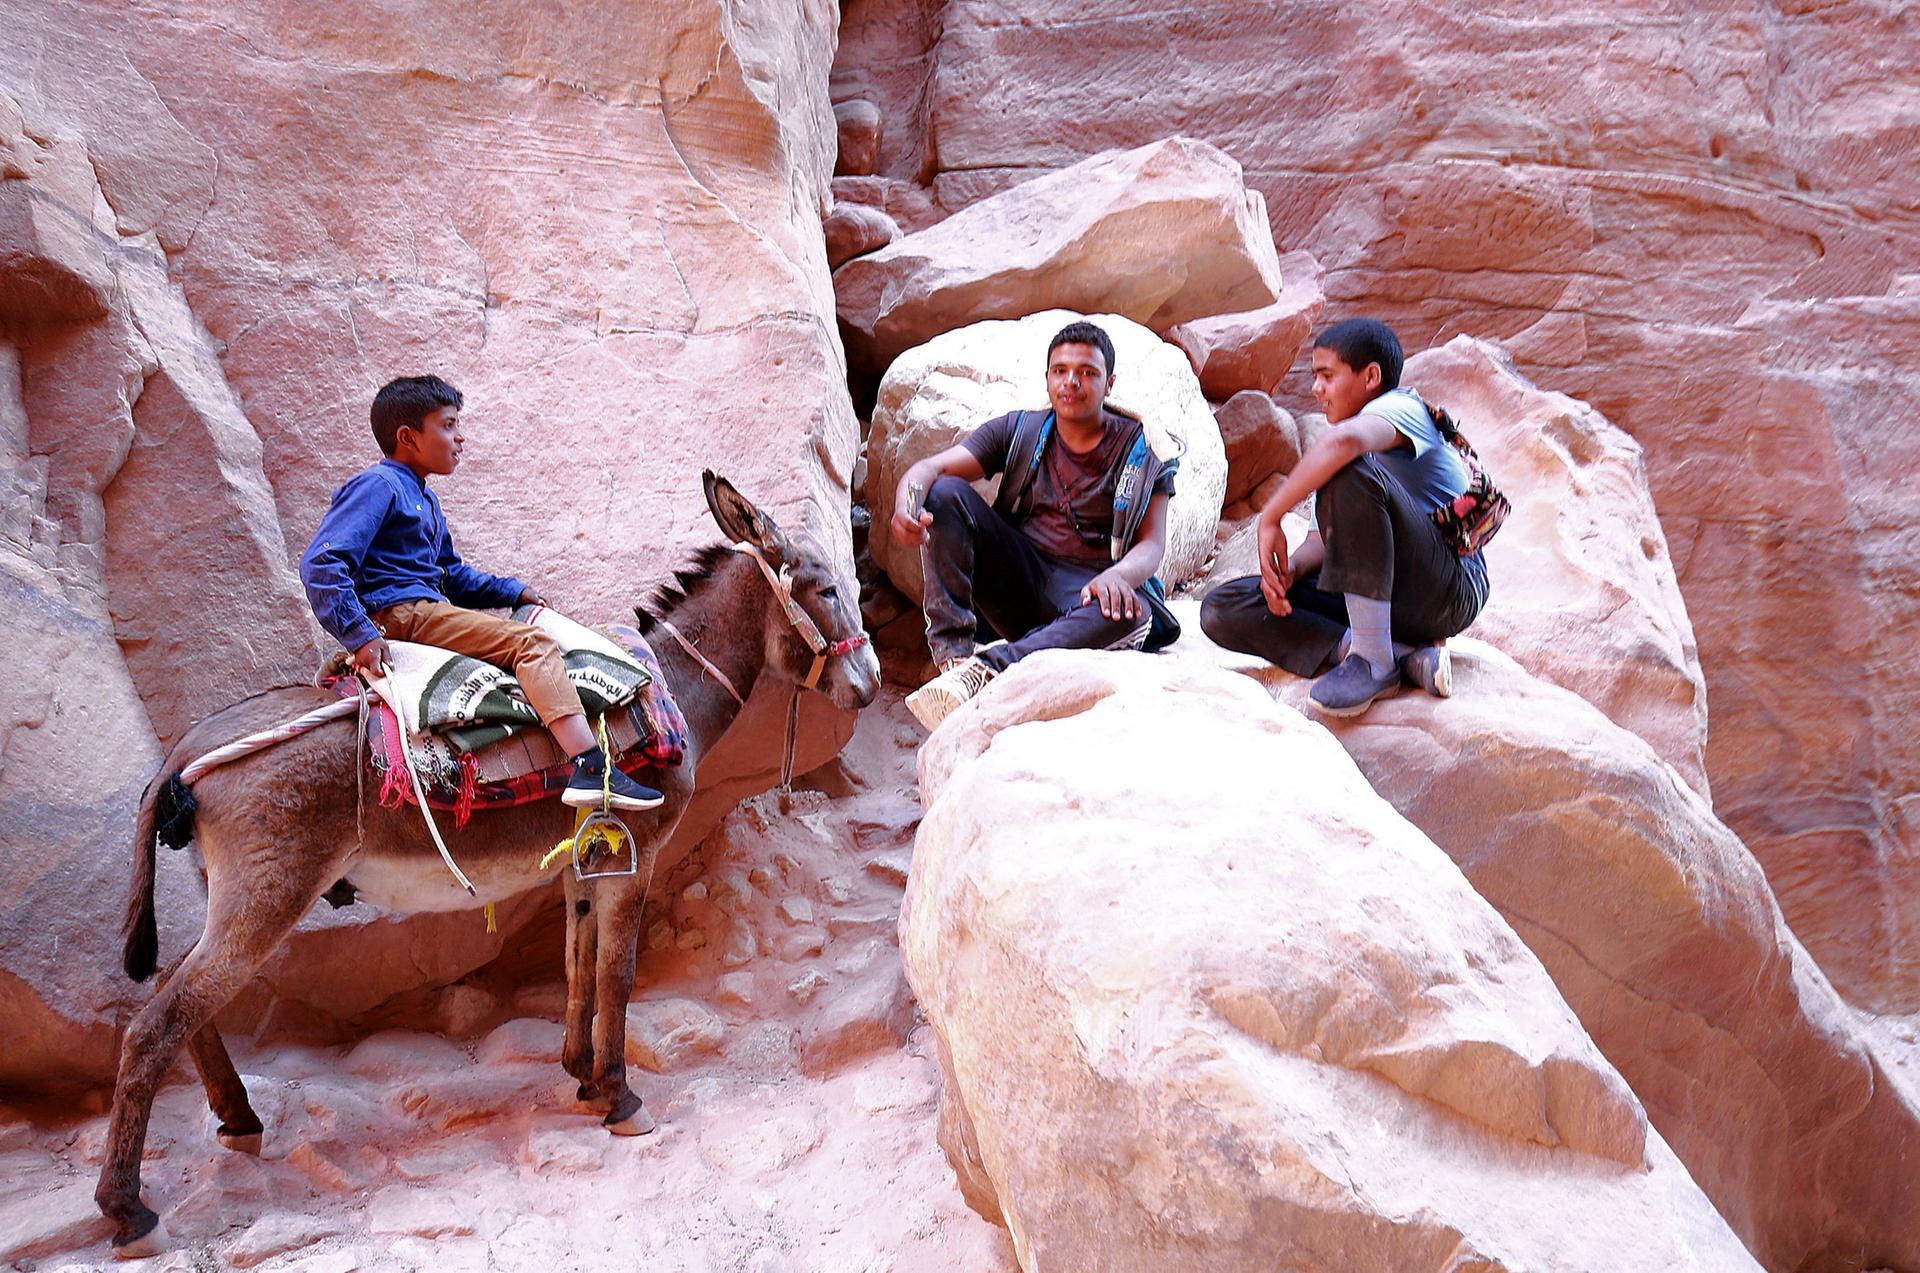 Ping pong shows in Thailand and riding donkeys in Petra: Our biggest travel  regrets